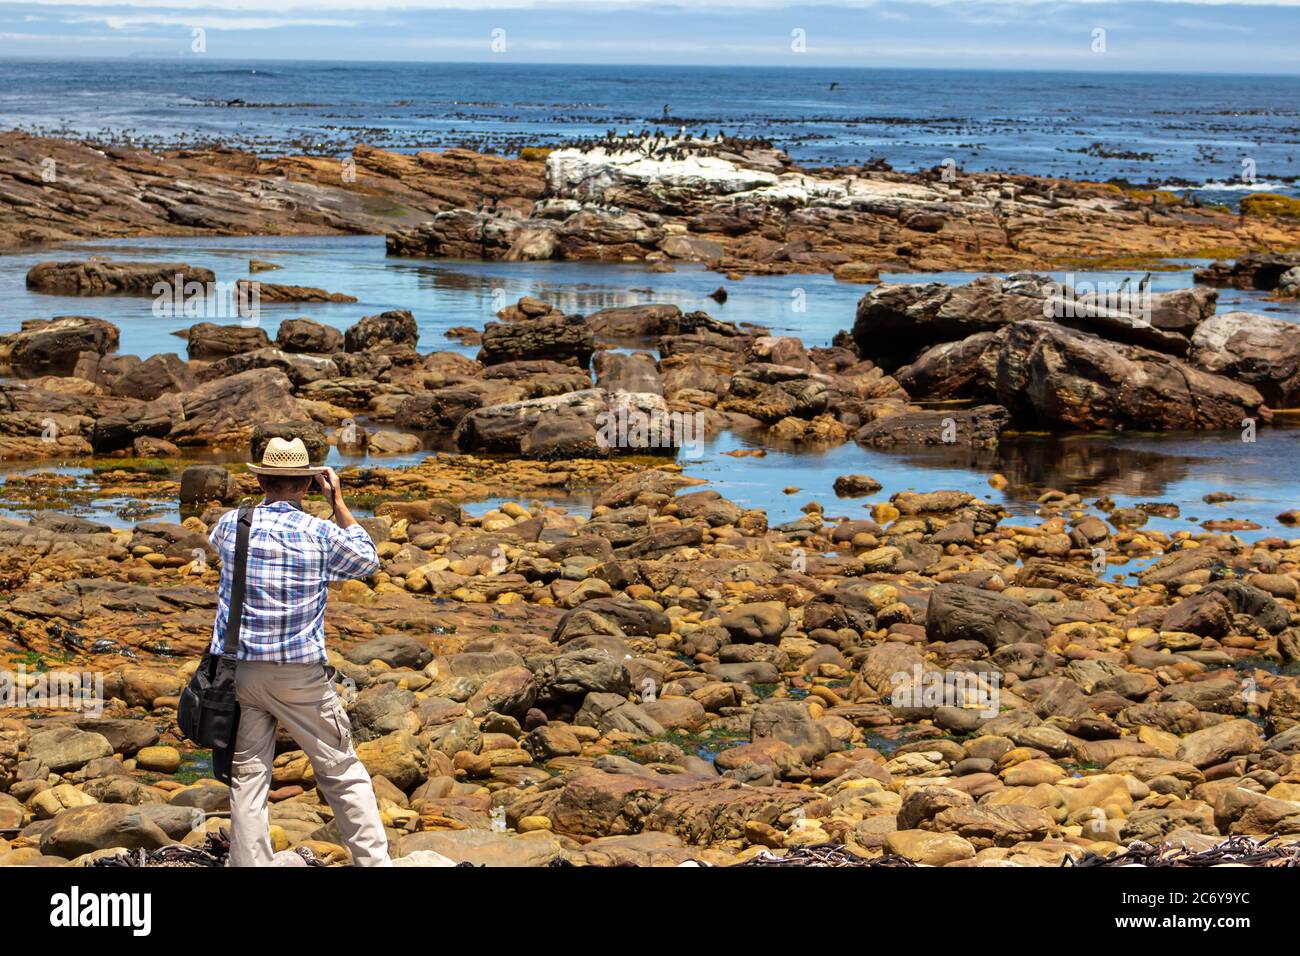 Man photographs wildlife at rocky ocean shore in the Cape of Good Hope Stock Photo